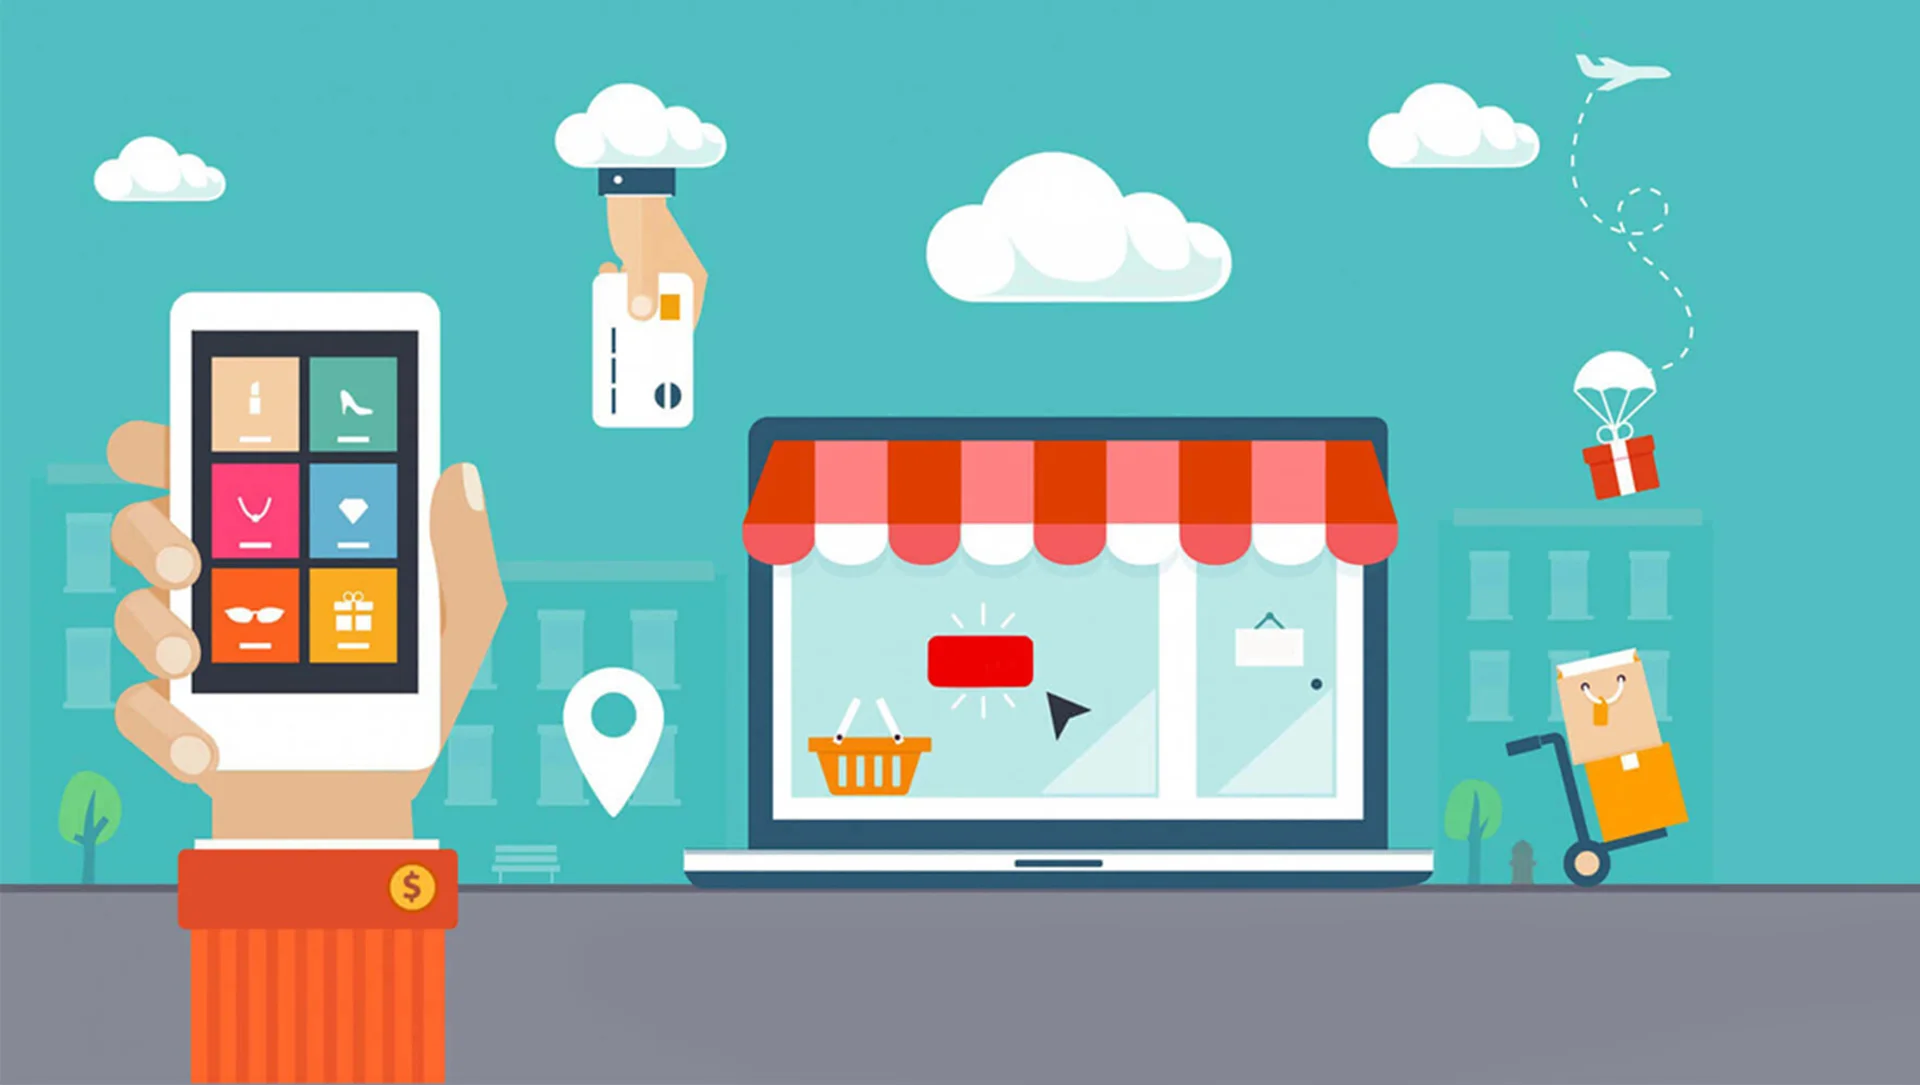 e-commerce-mobile-app-development-2022-know-the-features-trends-cost-related-blog-13